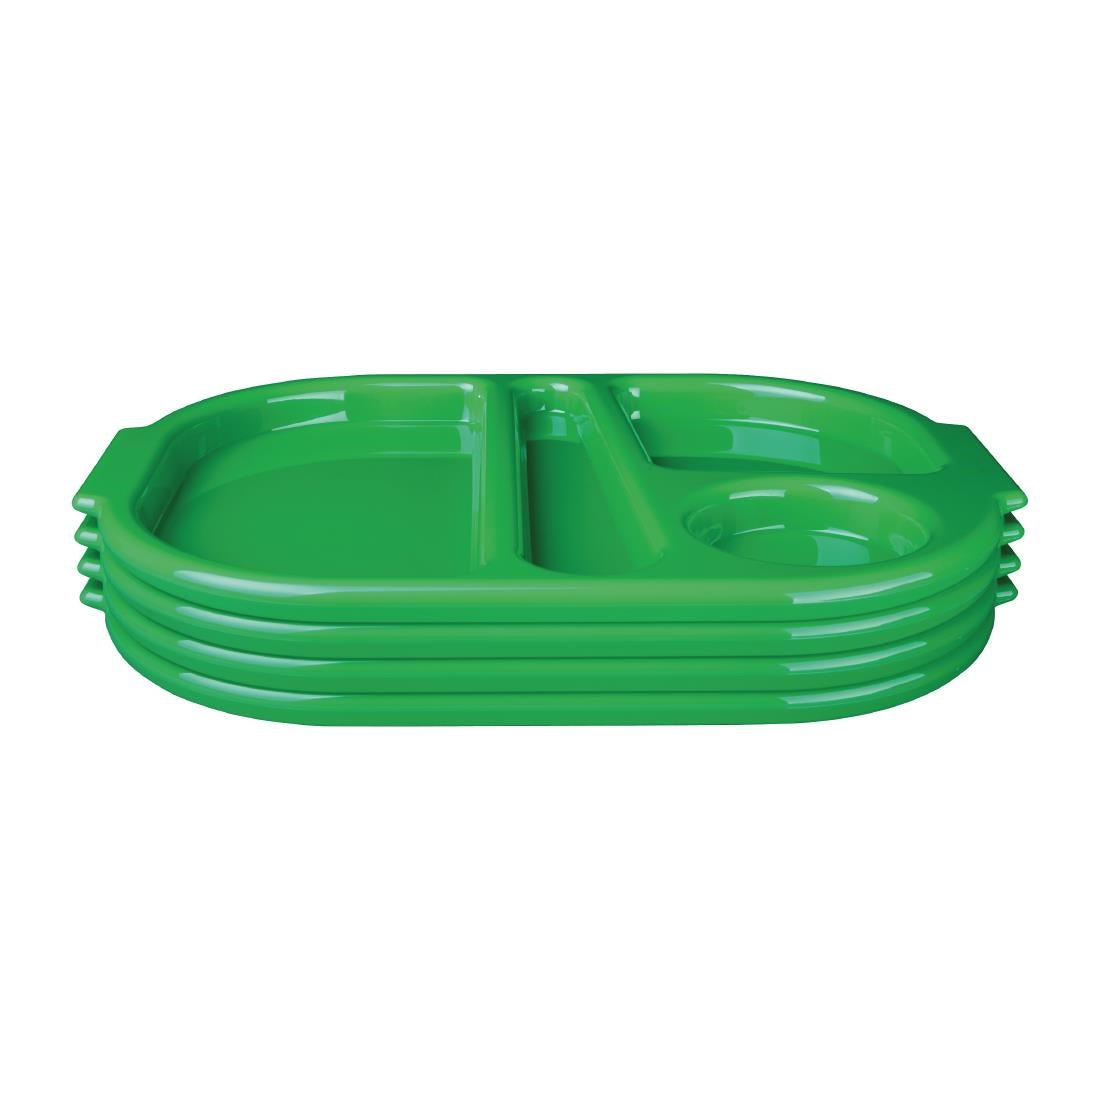 DL128 Kristallon Small Polycarbonate Compartment Food Trays Green 322mm JD Catering Equipment Solutions Ltd